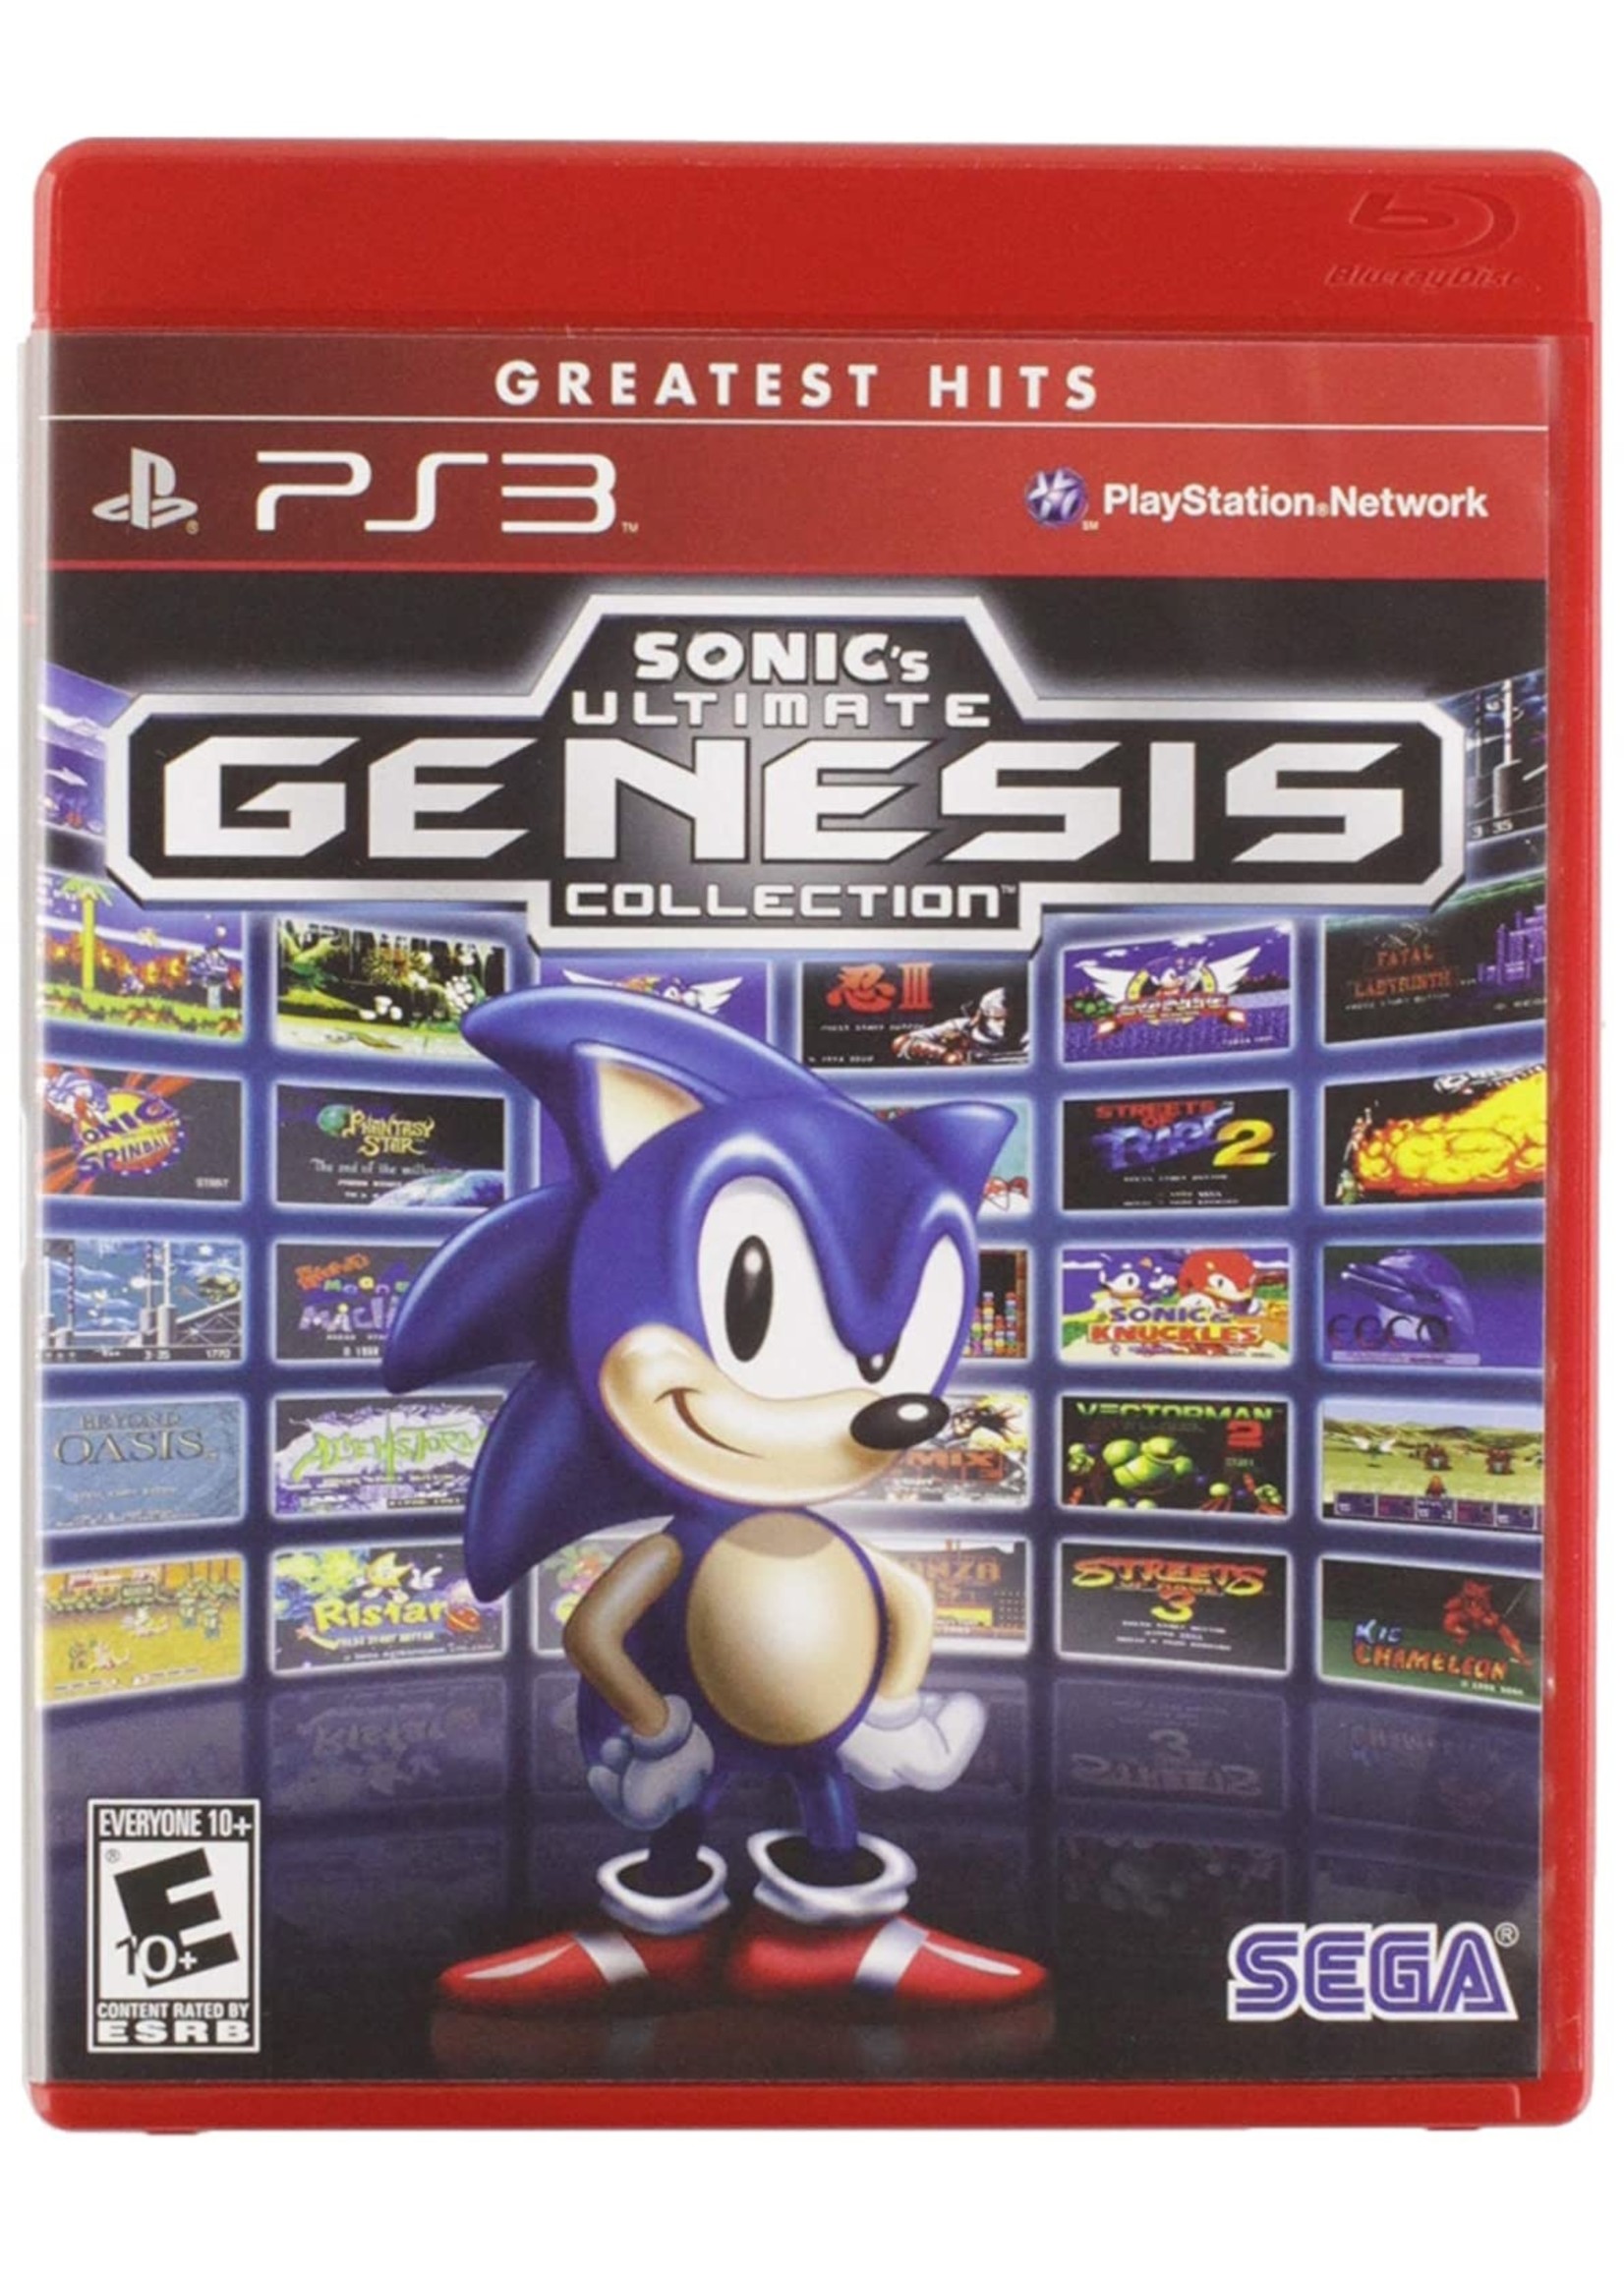 Sony Playstation 3 (PS3) Sonic's Ultimate Genesis Collection